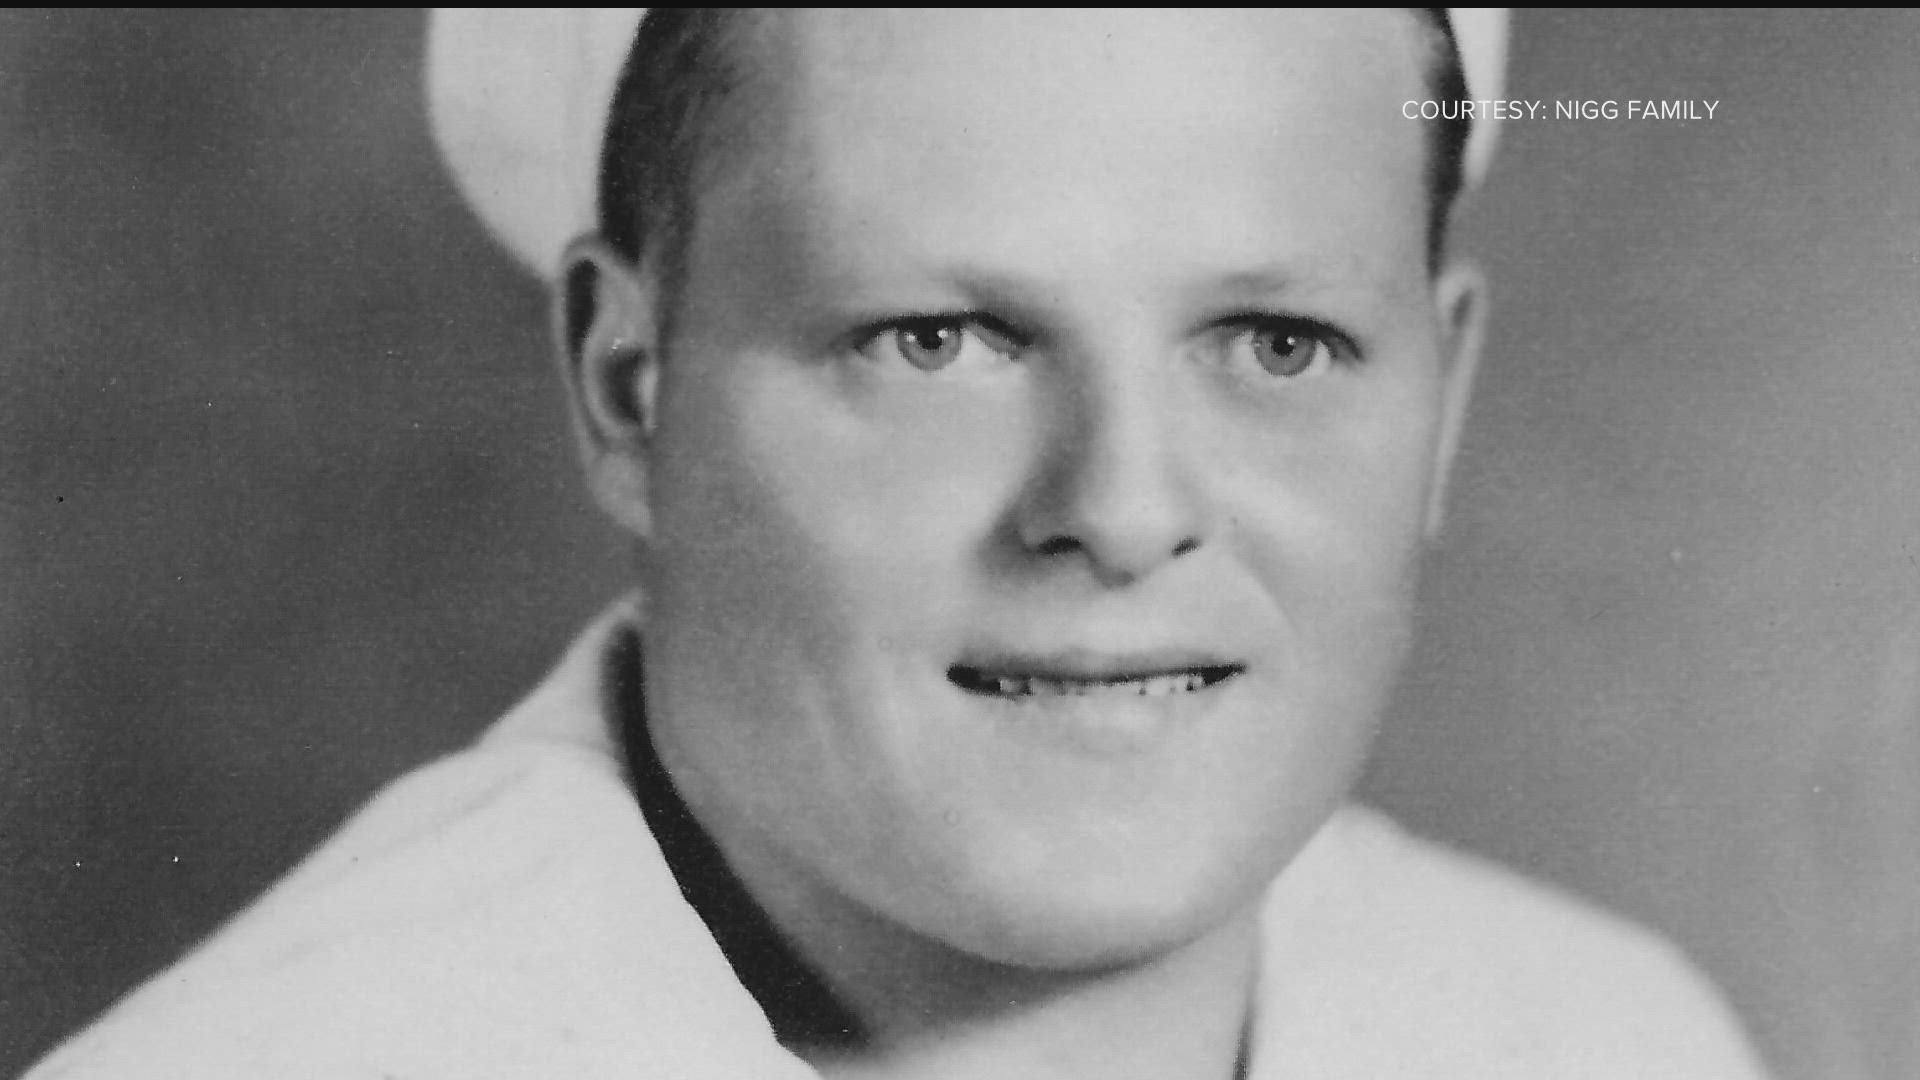 After enlisting in 1940, Budd was aboard the USS Oklahoma during the attack on Pearl Harbor. His remains were finally identified last year when a DNA test was done.